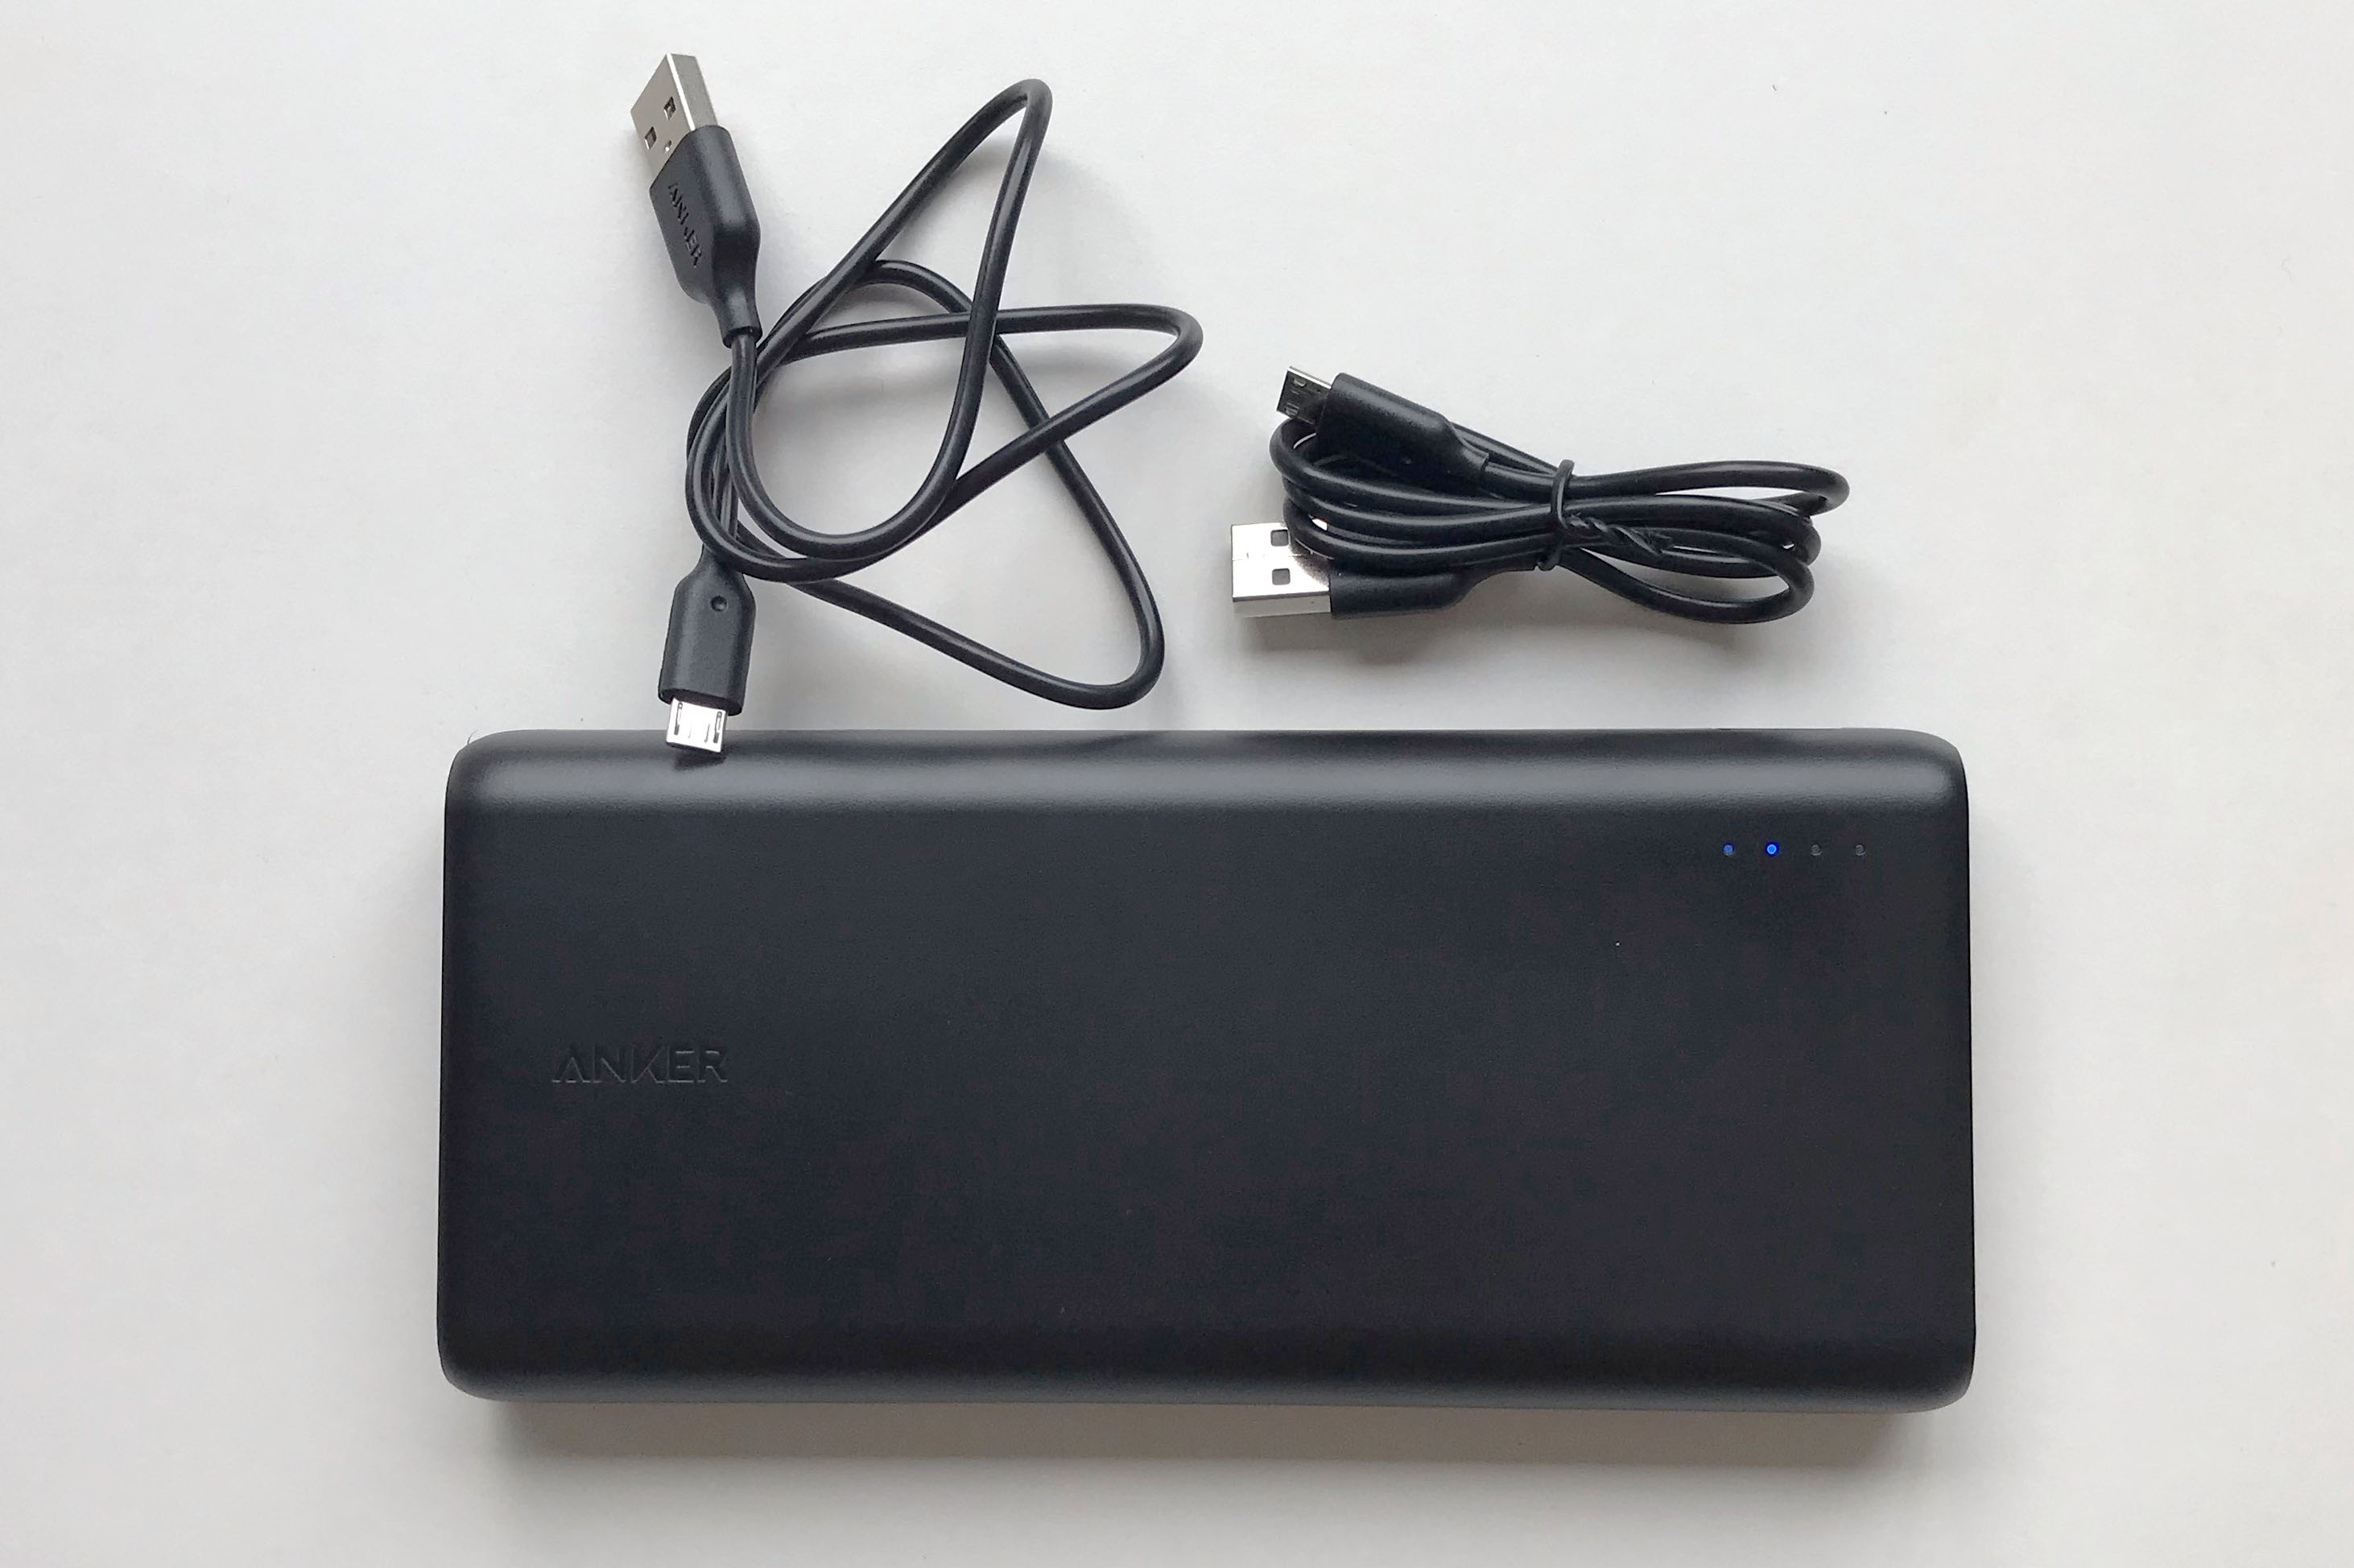 Anker 622 magnetic wireless power bank: Excellent for on-the-go